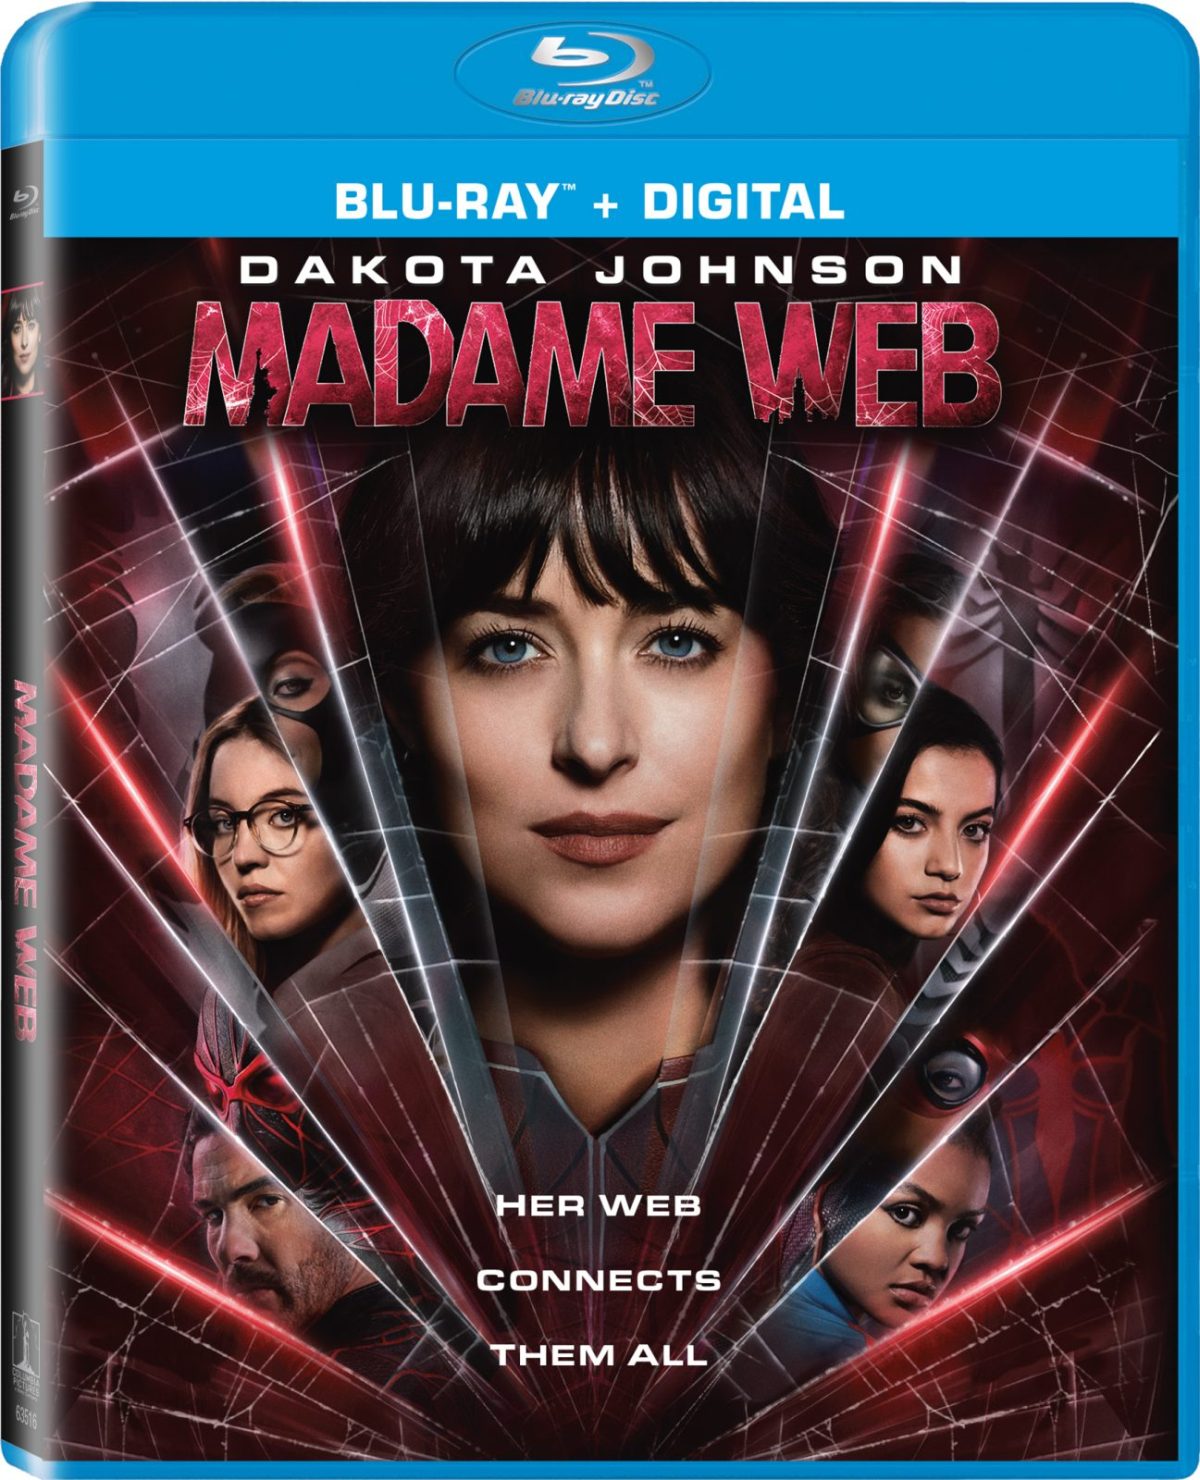 Madame Web swings onto Blu-ray and Digital! Dive deeper into the story with exclusive bonus content. Must-have for Marvel fans! #MadameWeb #Marvel